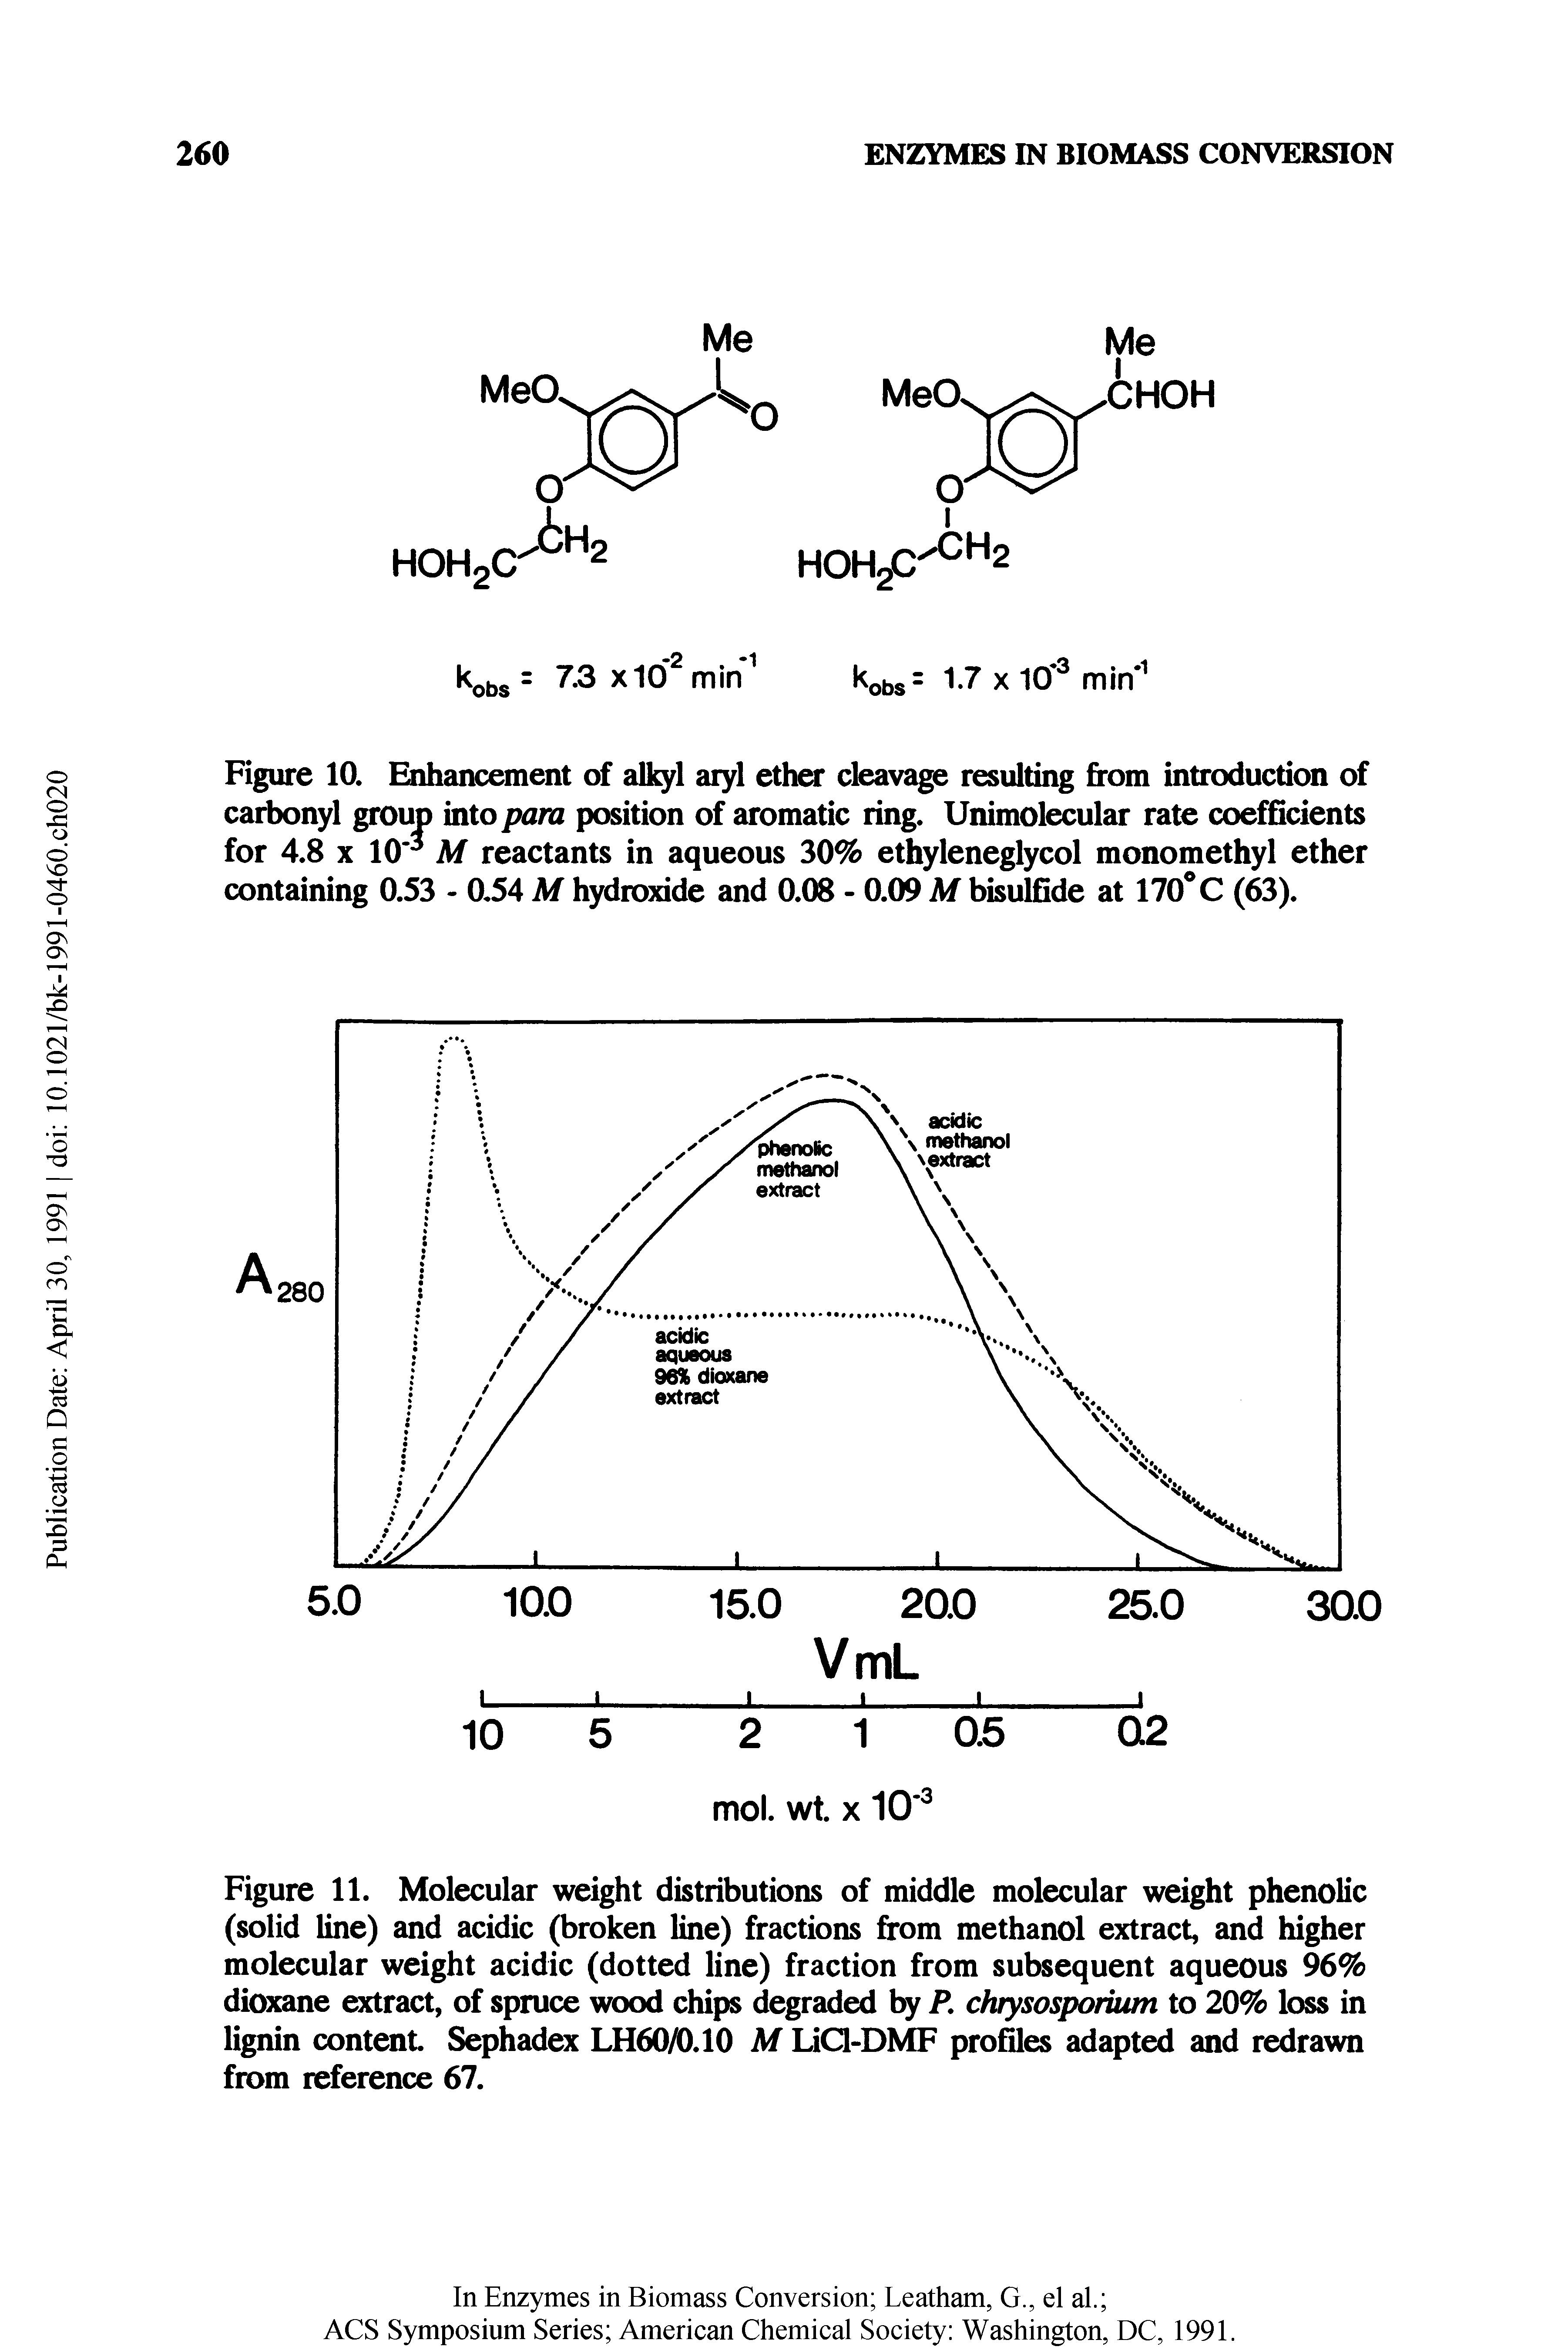 Figure 11. Molecular weight distributions of middle molecular weight phenolic (solid line) and acidic (broken line) fractions from methanol extract, and higher molecular weight acidic (dotted line) fraction from subsequent aqueous 96% dioxane ract, of spruce wood chips degraded by P, ckrysosporium to 20% loss in lignin content Sephadex LH60A).10 M LiQ-DMF profiles adapted and redrawn from reference 67.